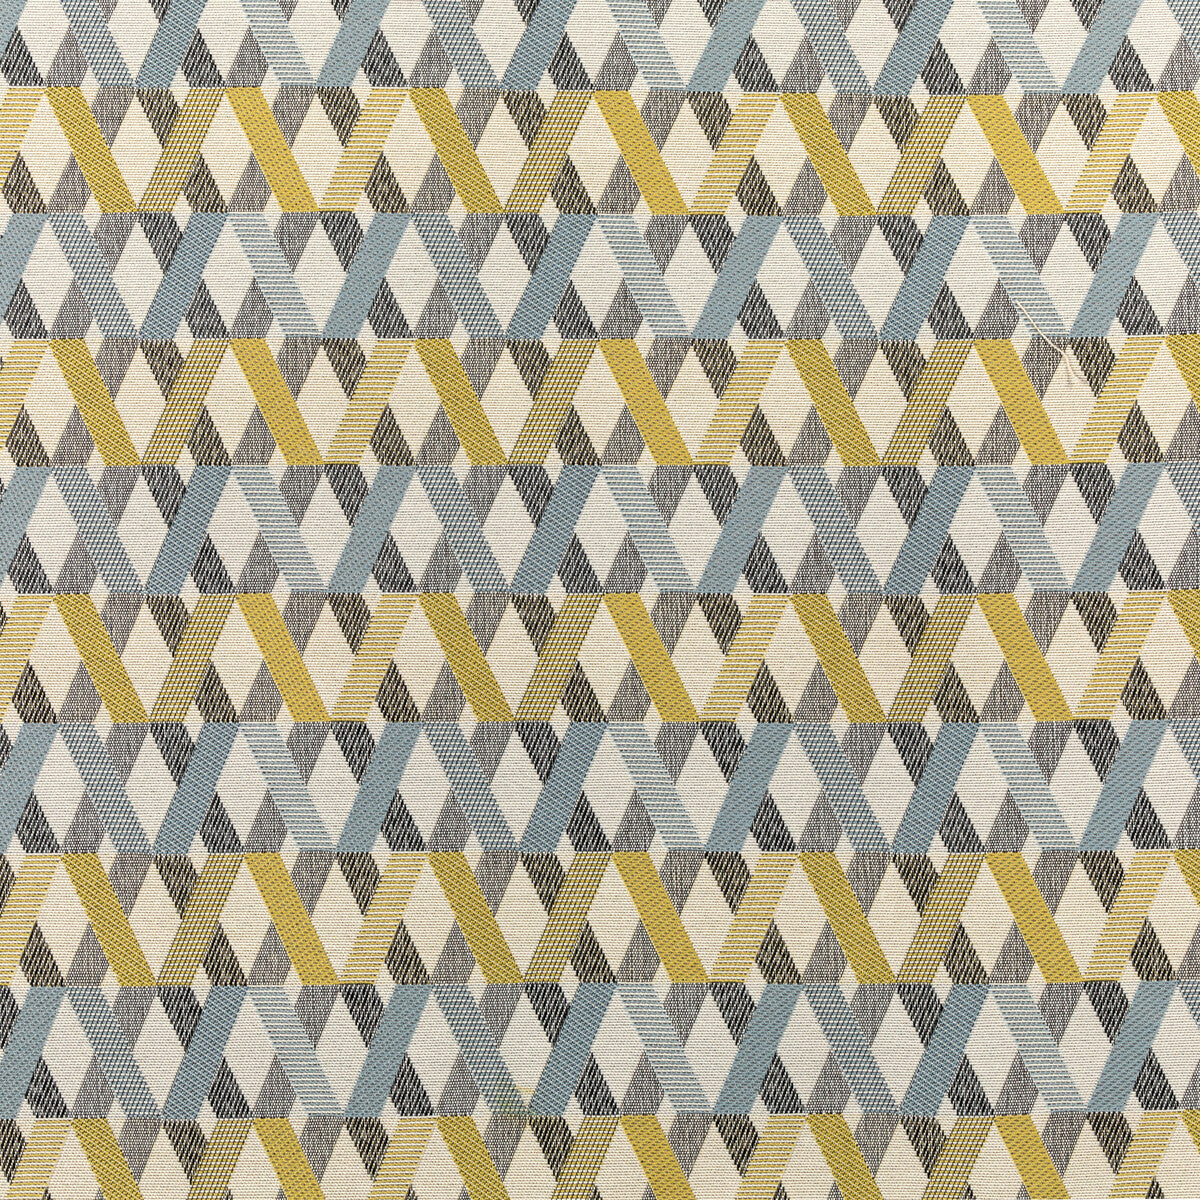 Bridgework fabric in zest color - pattern 36276.540.0 - by Kravet Contract in the Gis Crypton collection